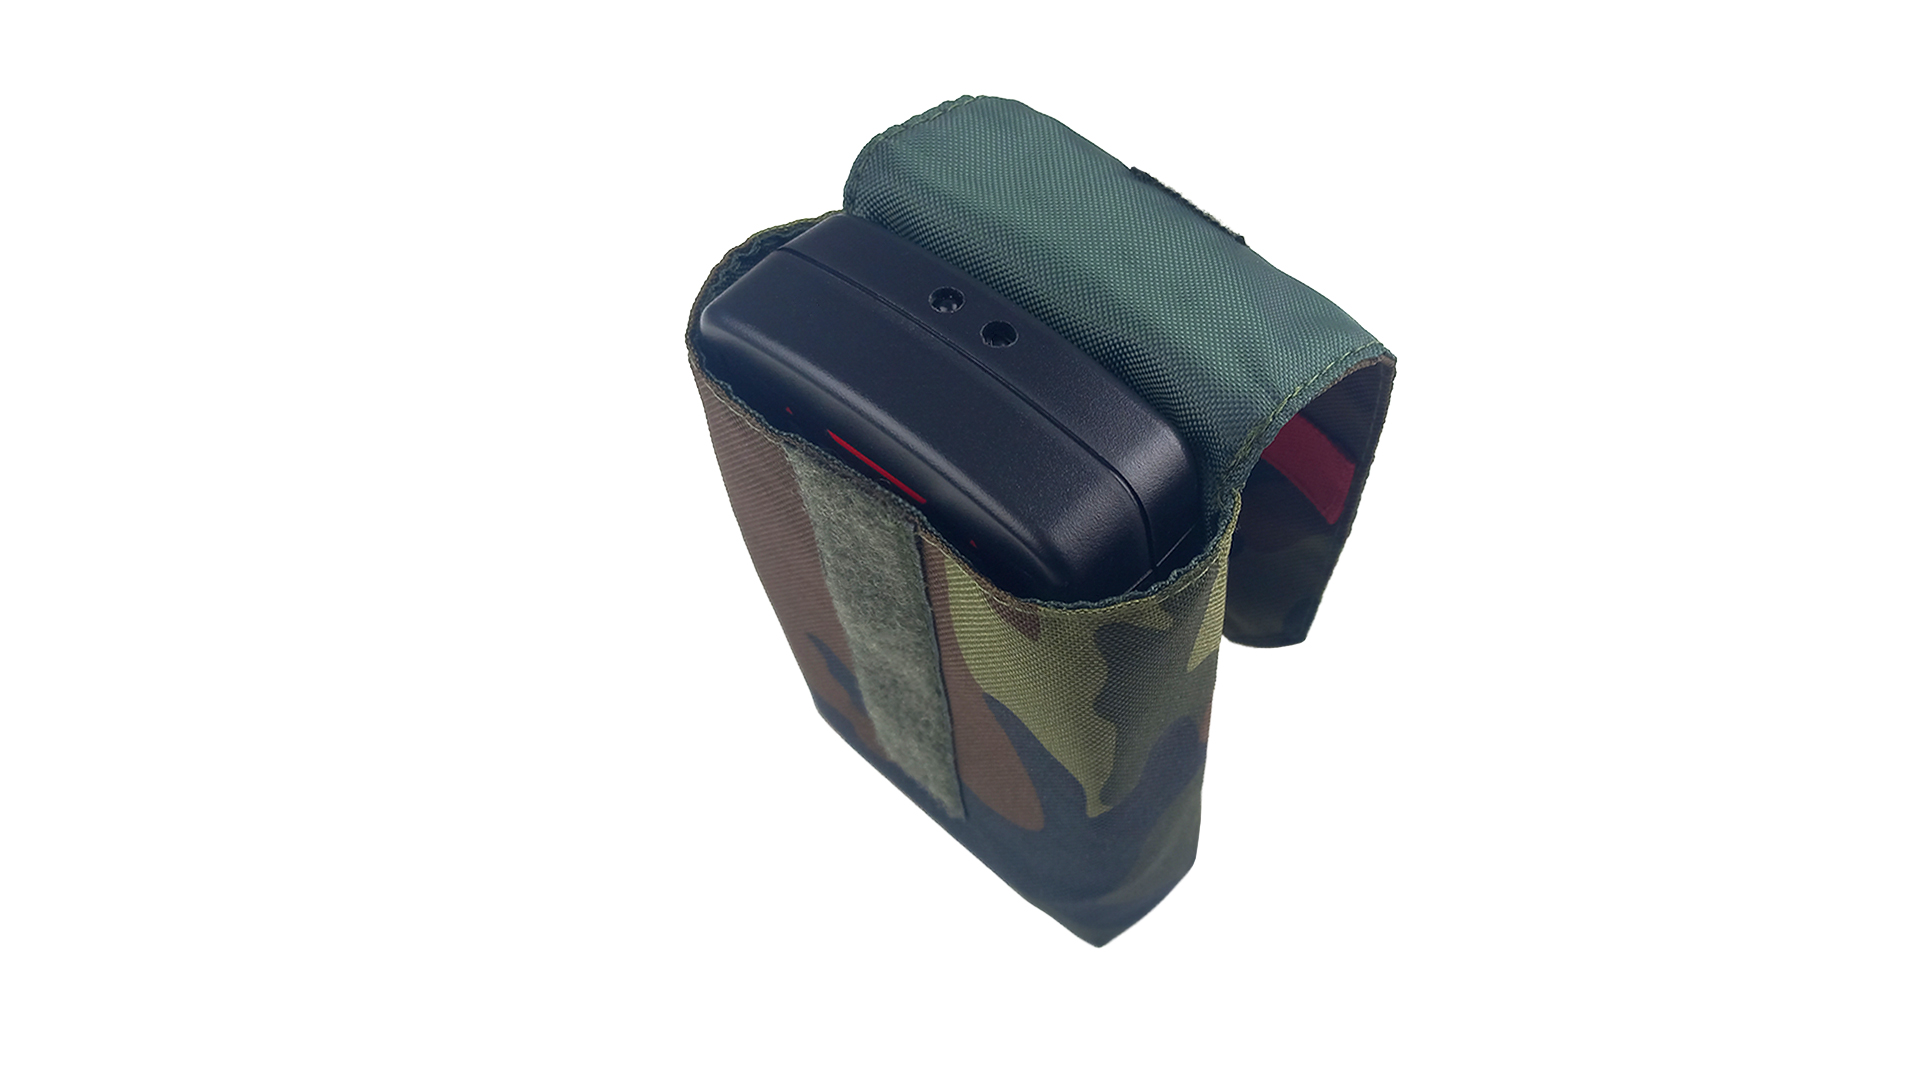 Pouch For Medic Game Set photo 3